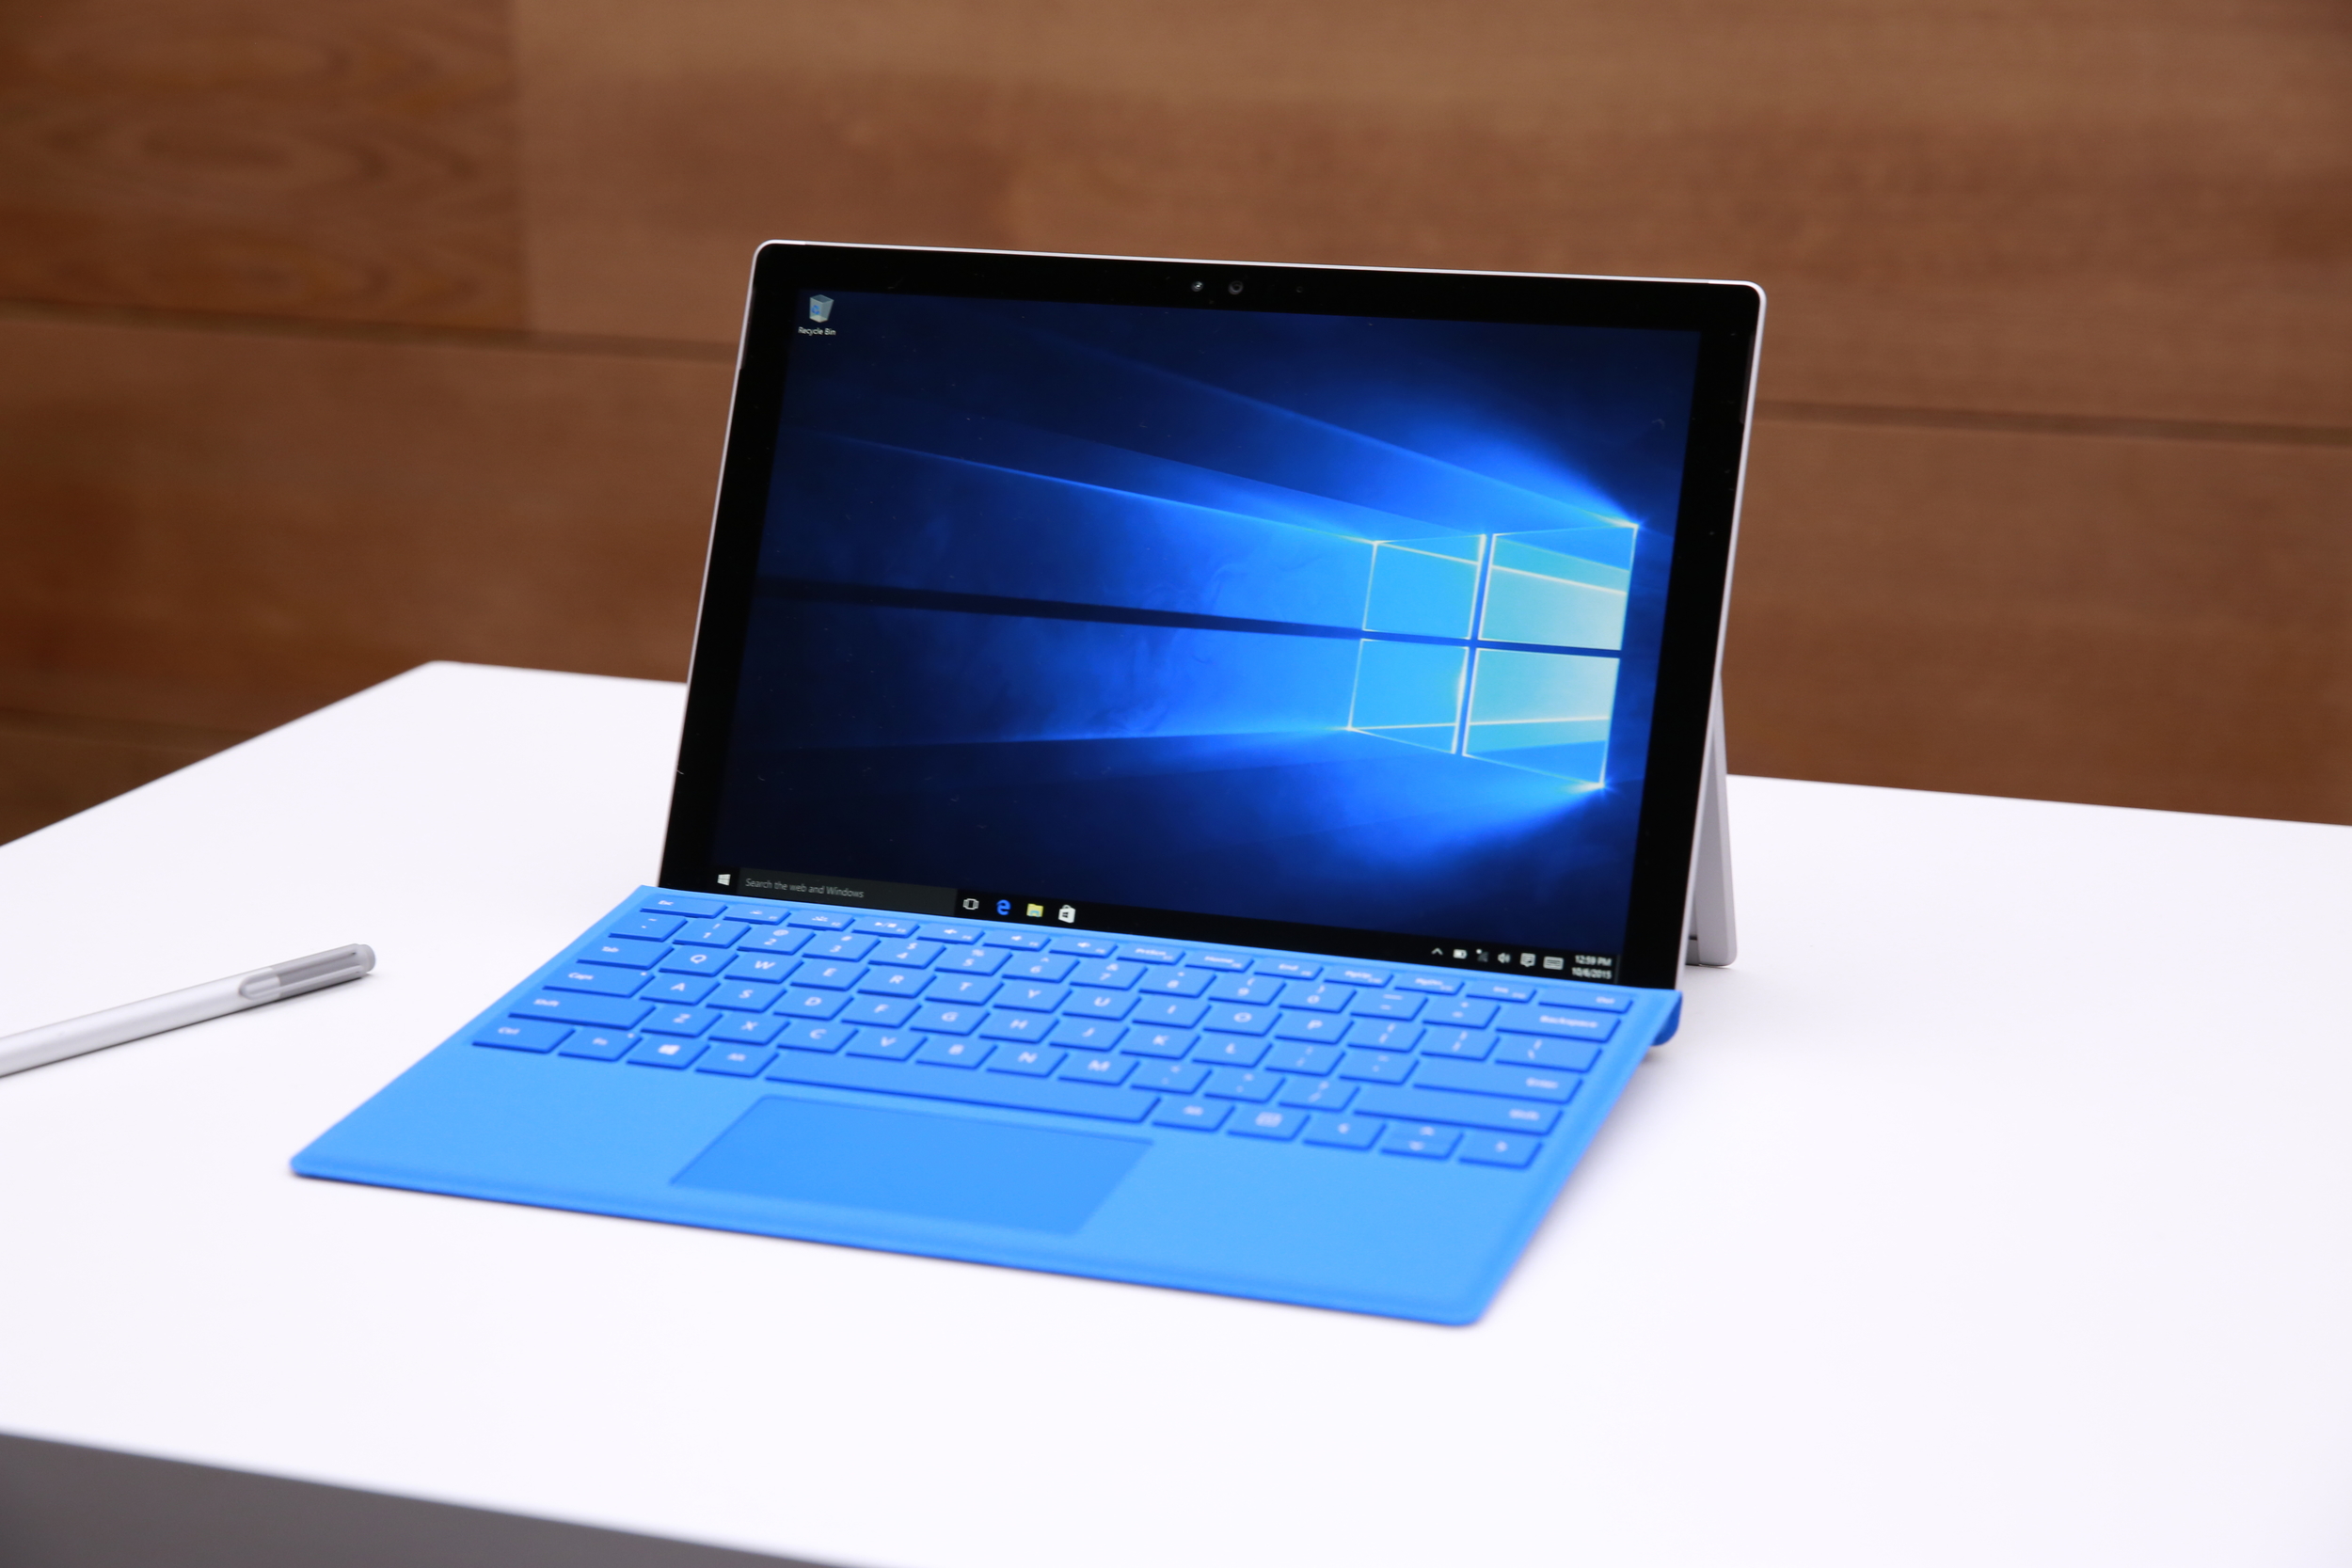  Third time was a charm for Microsoft's Surface Pro 3, this 4 is looking even better 